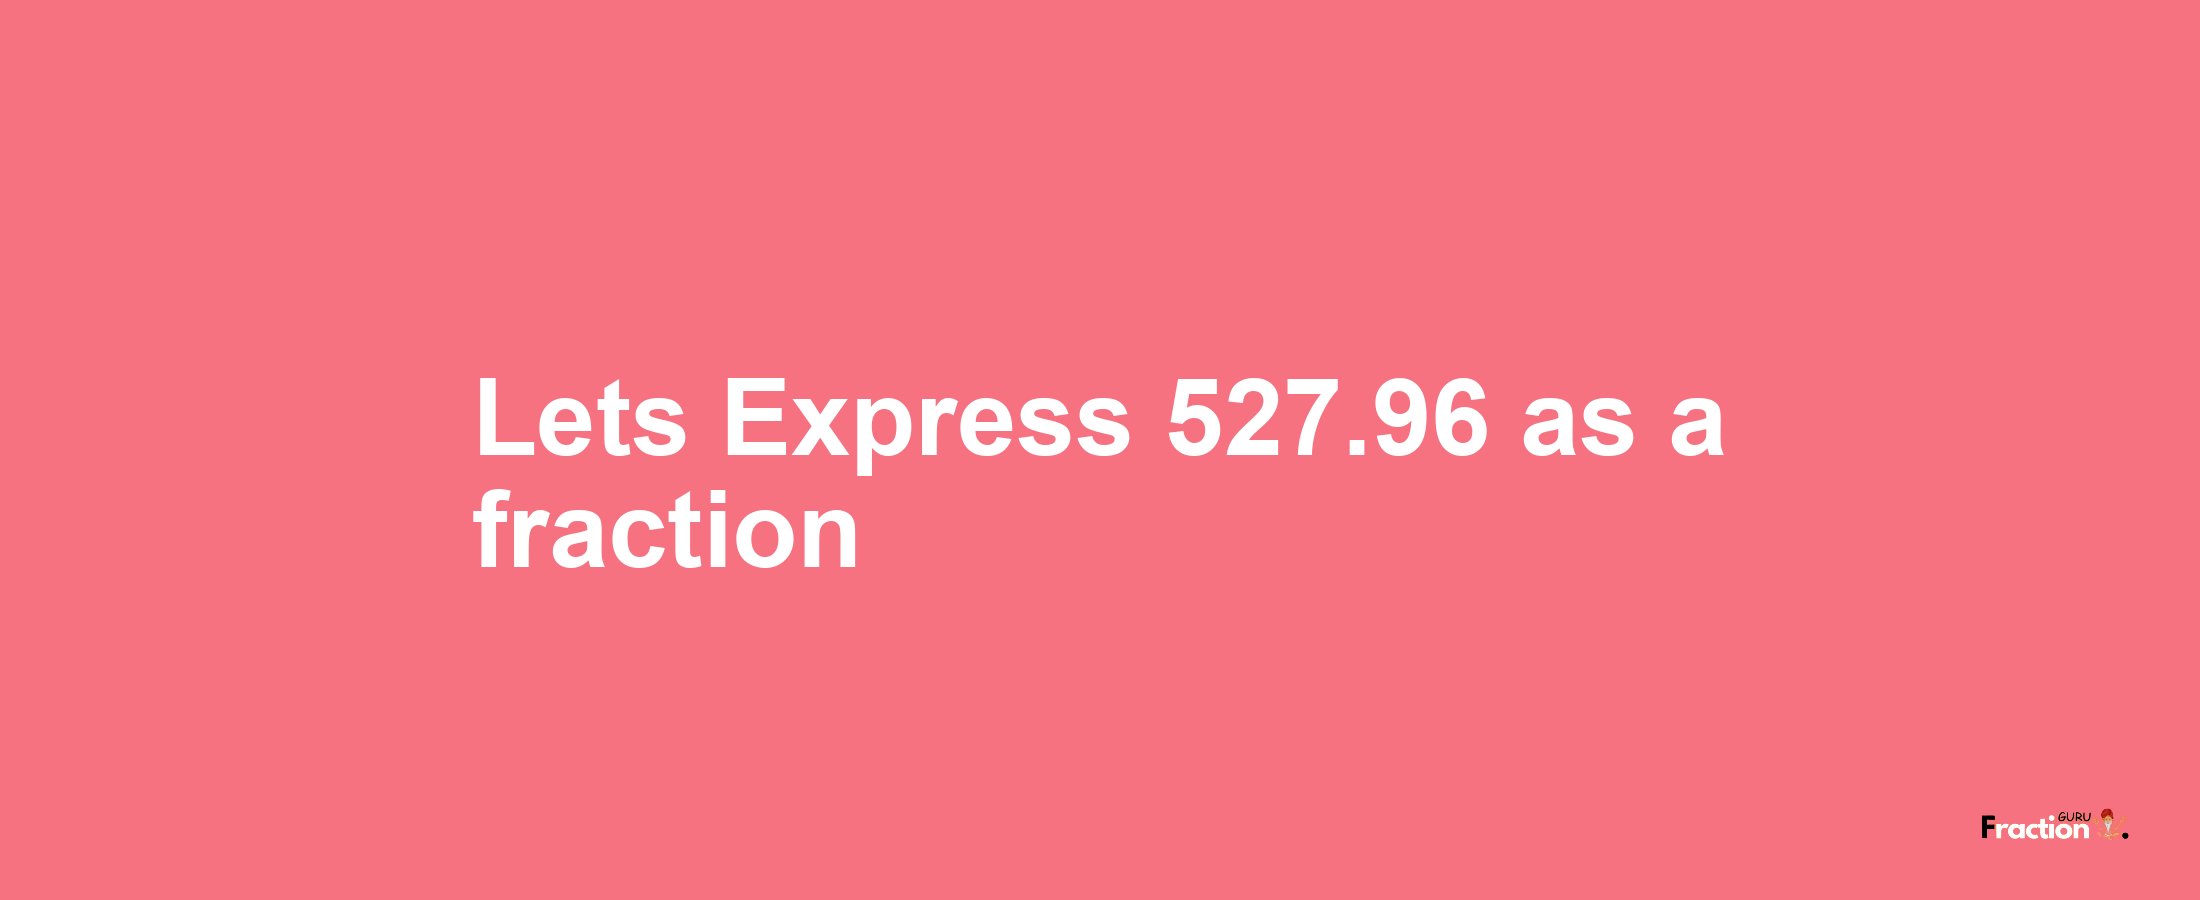 Lets Express 527.96 as afraction